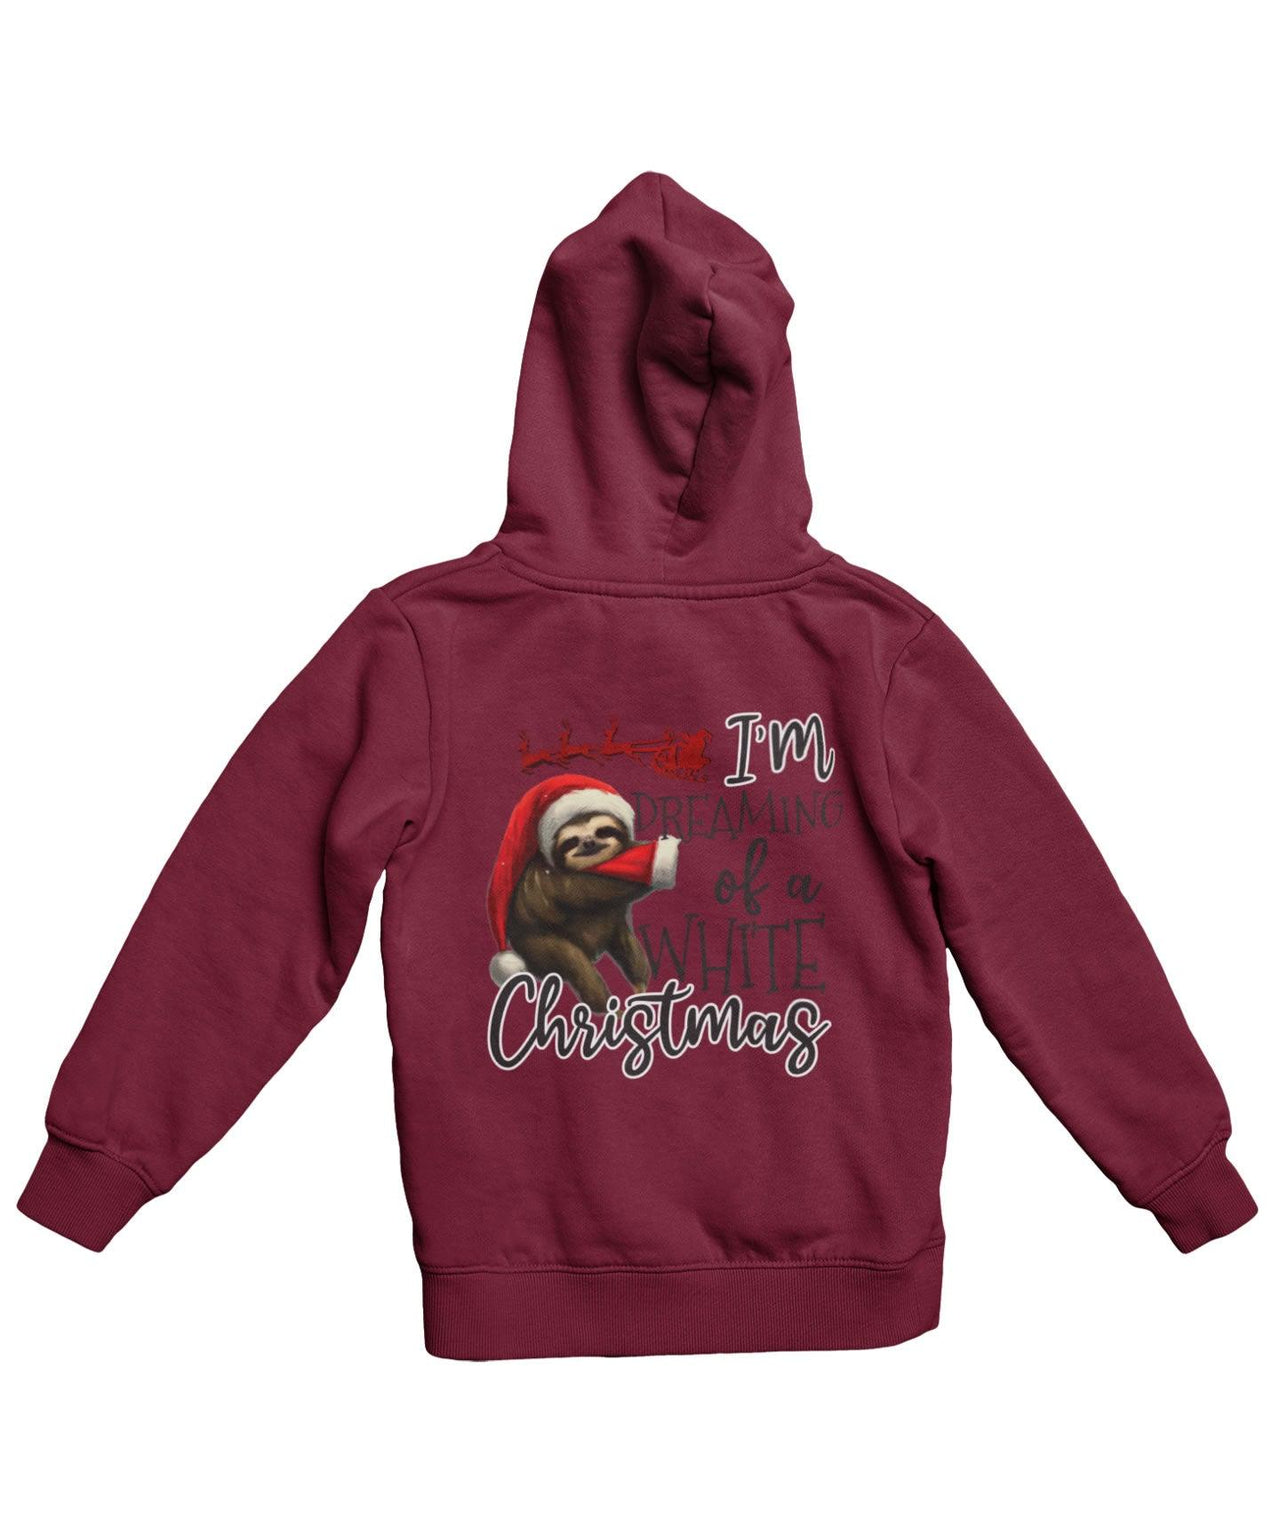 Sloth Dreaming Of A White Christmas Back Printed Sloth Hoodie For Men and Women 8Ball